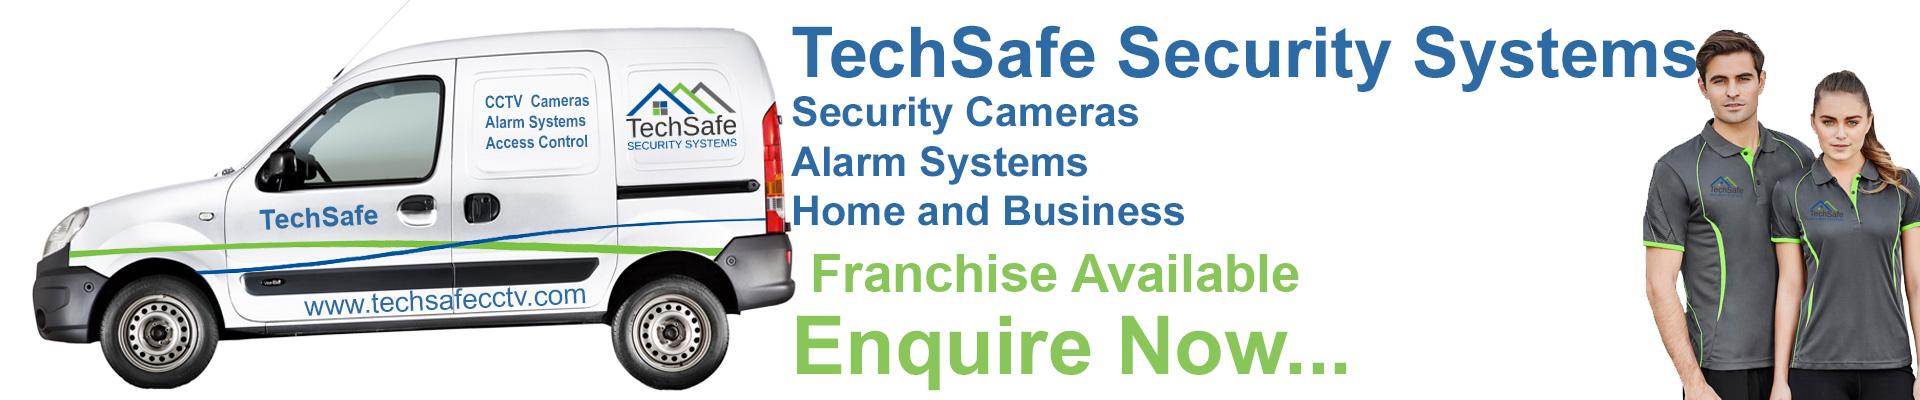 TechSafe Security Systems Franchises Available